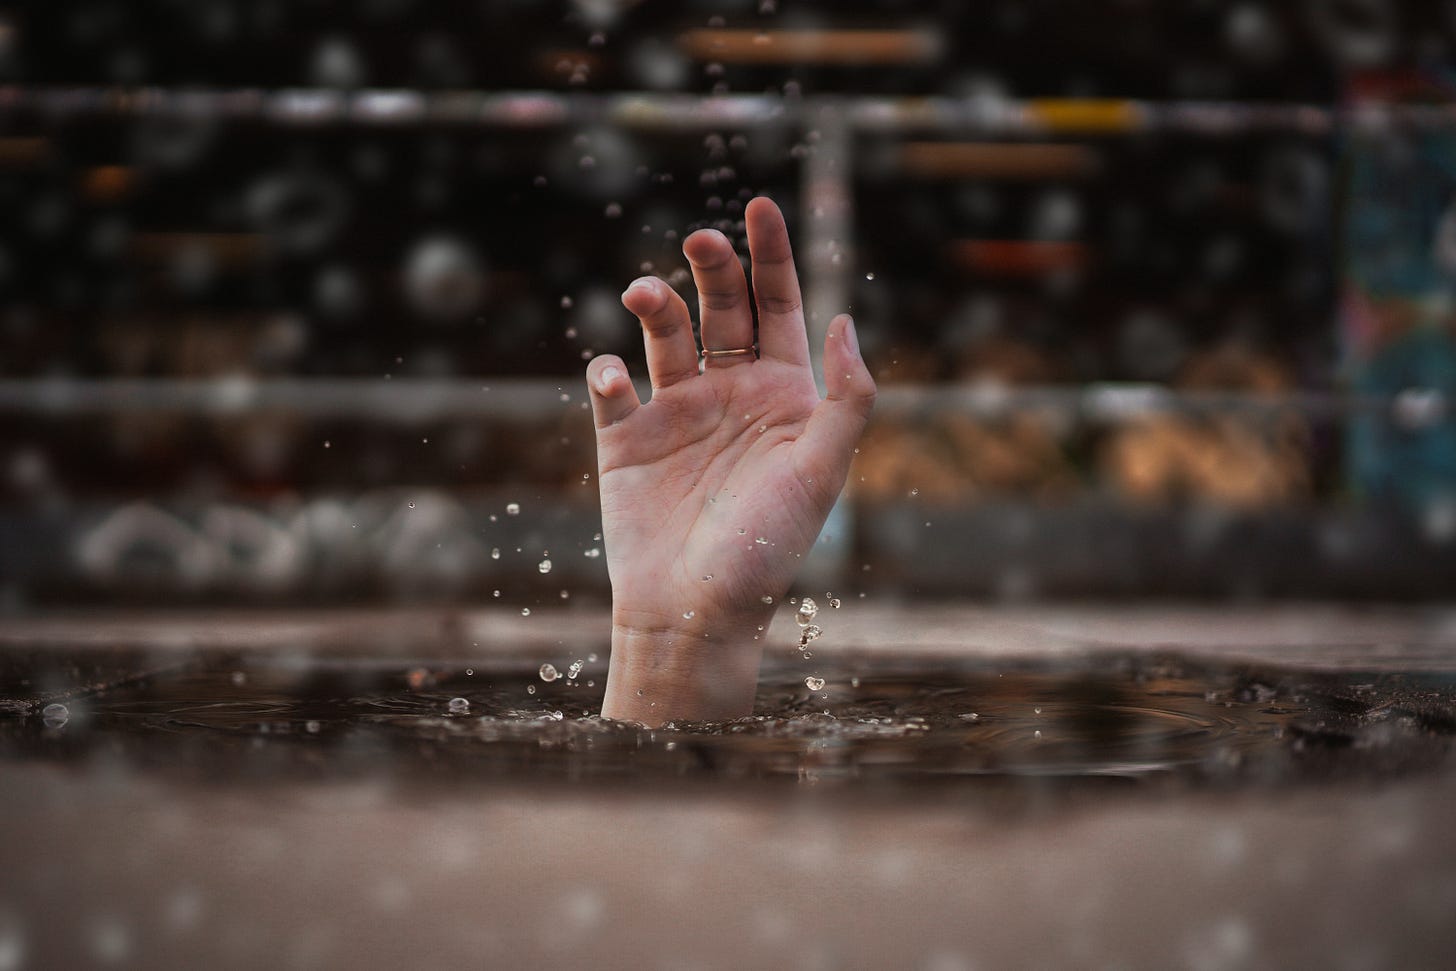 A hand rising up from the water.